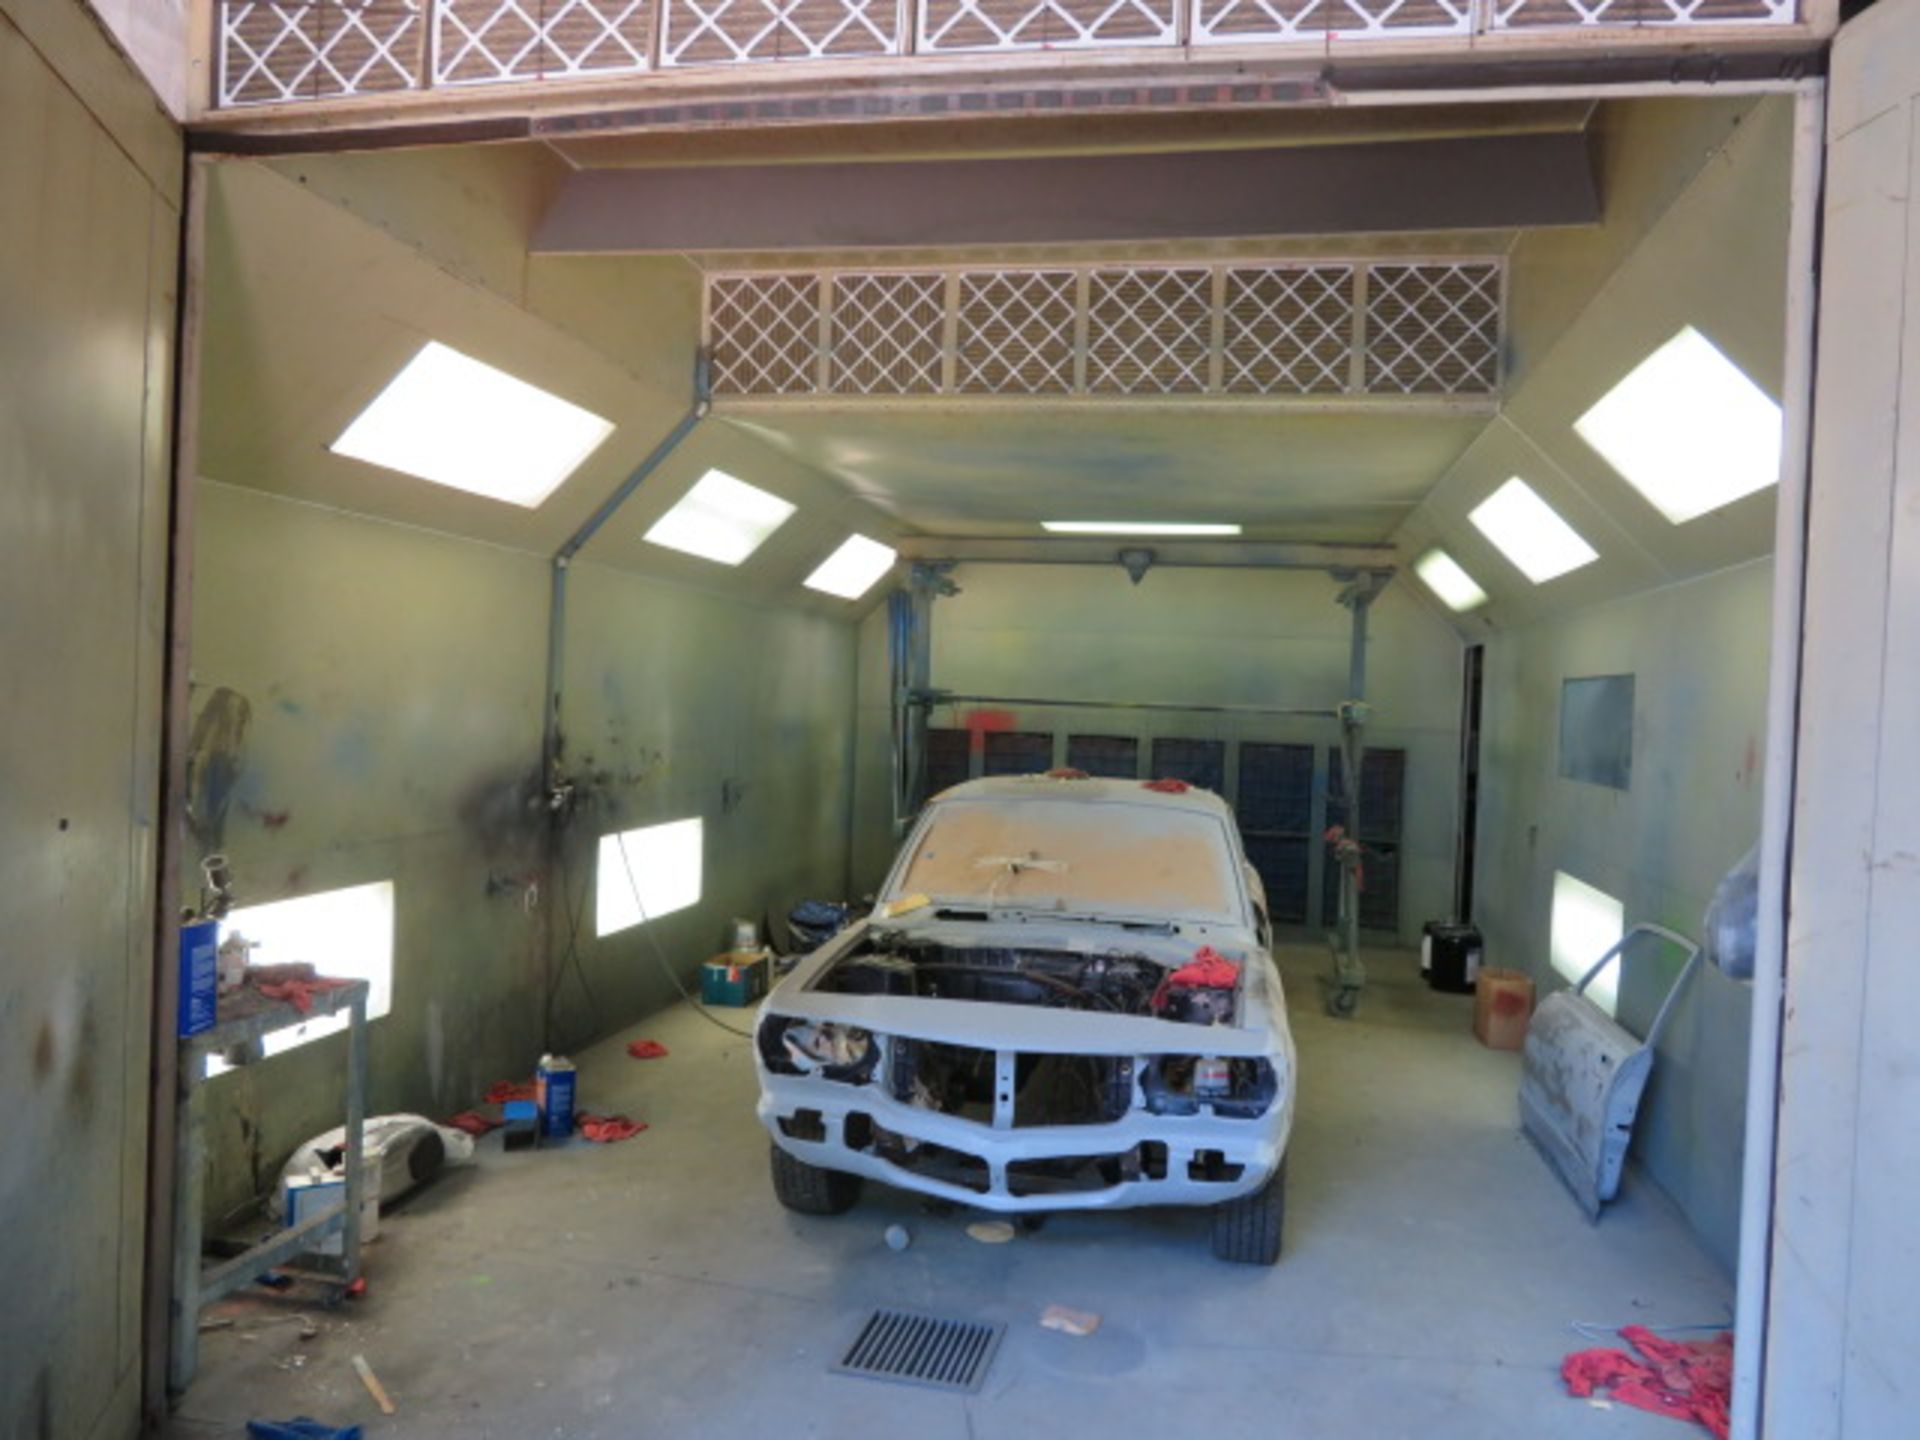 DEVILBISS 24 FT. X 14 FT. X 8 FT-11 IN. DRIVE-IN PAINT SPRAY BOOTH, REAR EXHAUST - Image 3 of 7